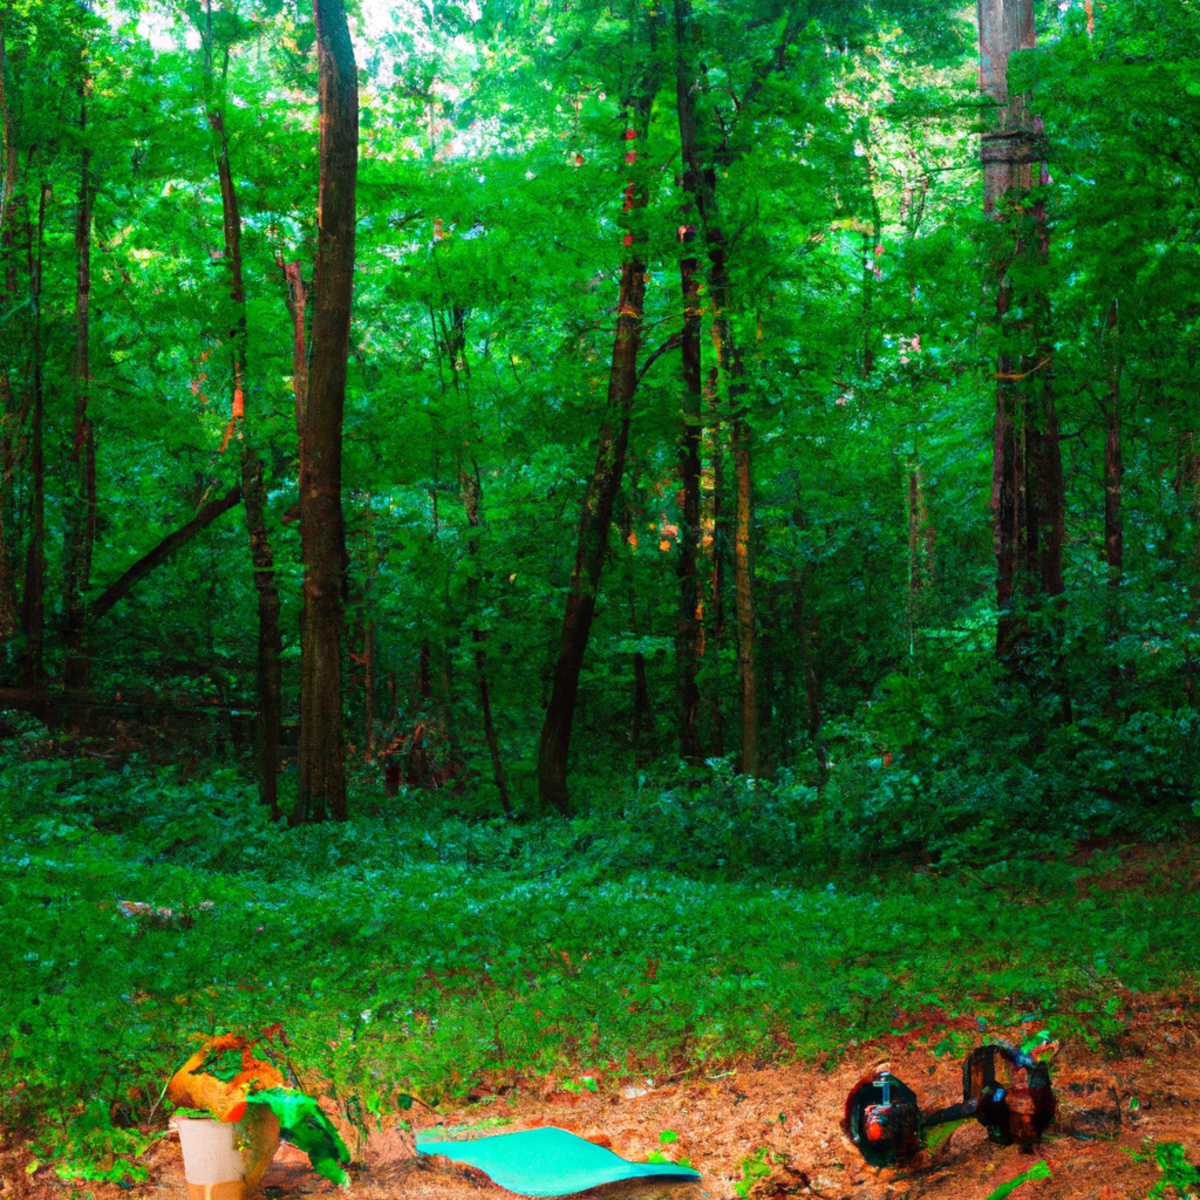 The photo captures a serene scene of a lush green forest with a small clearing in the center. In the foreground, there are various fitness objects scattered around, including a yoga mat, resistance bands, and a set of dumbbells. The objects are strategically placed to blend in with the natural surroundings, giving the impression that they are a part of the environment. The sunlight filters through the trees, casting a warm glow on the scene, and a gentle breeze rustles the leaves, adding to the peaceful ambiance. The photo perfectly encapsulates the idea of getting fit in nature, showcasing the beauty and tranquility of outdoor fitness.